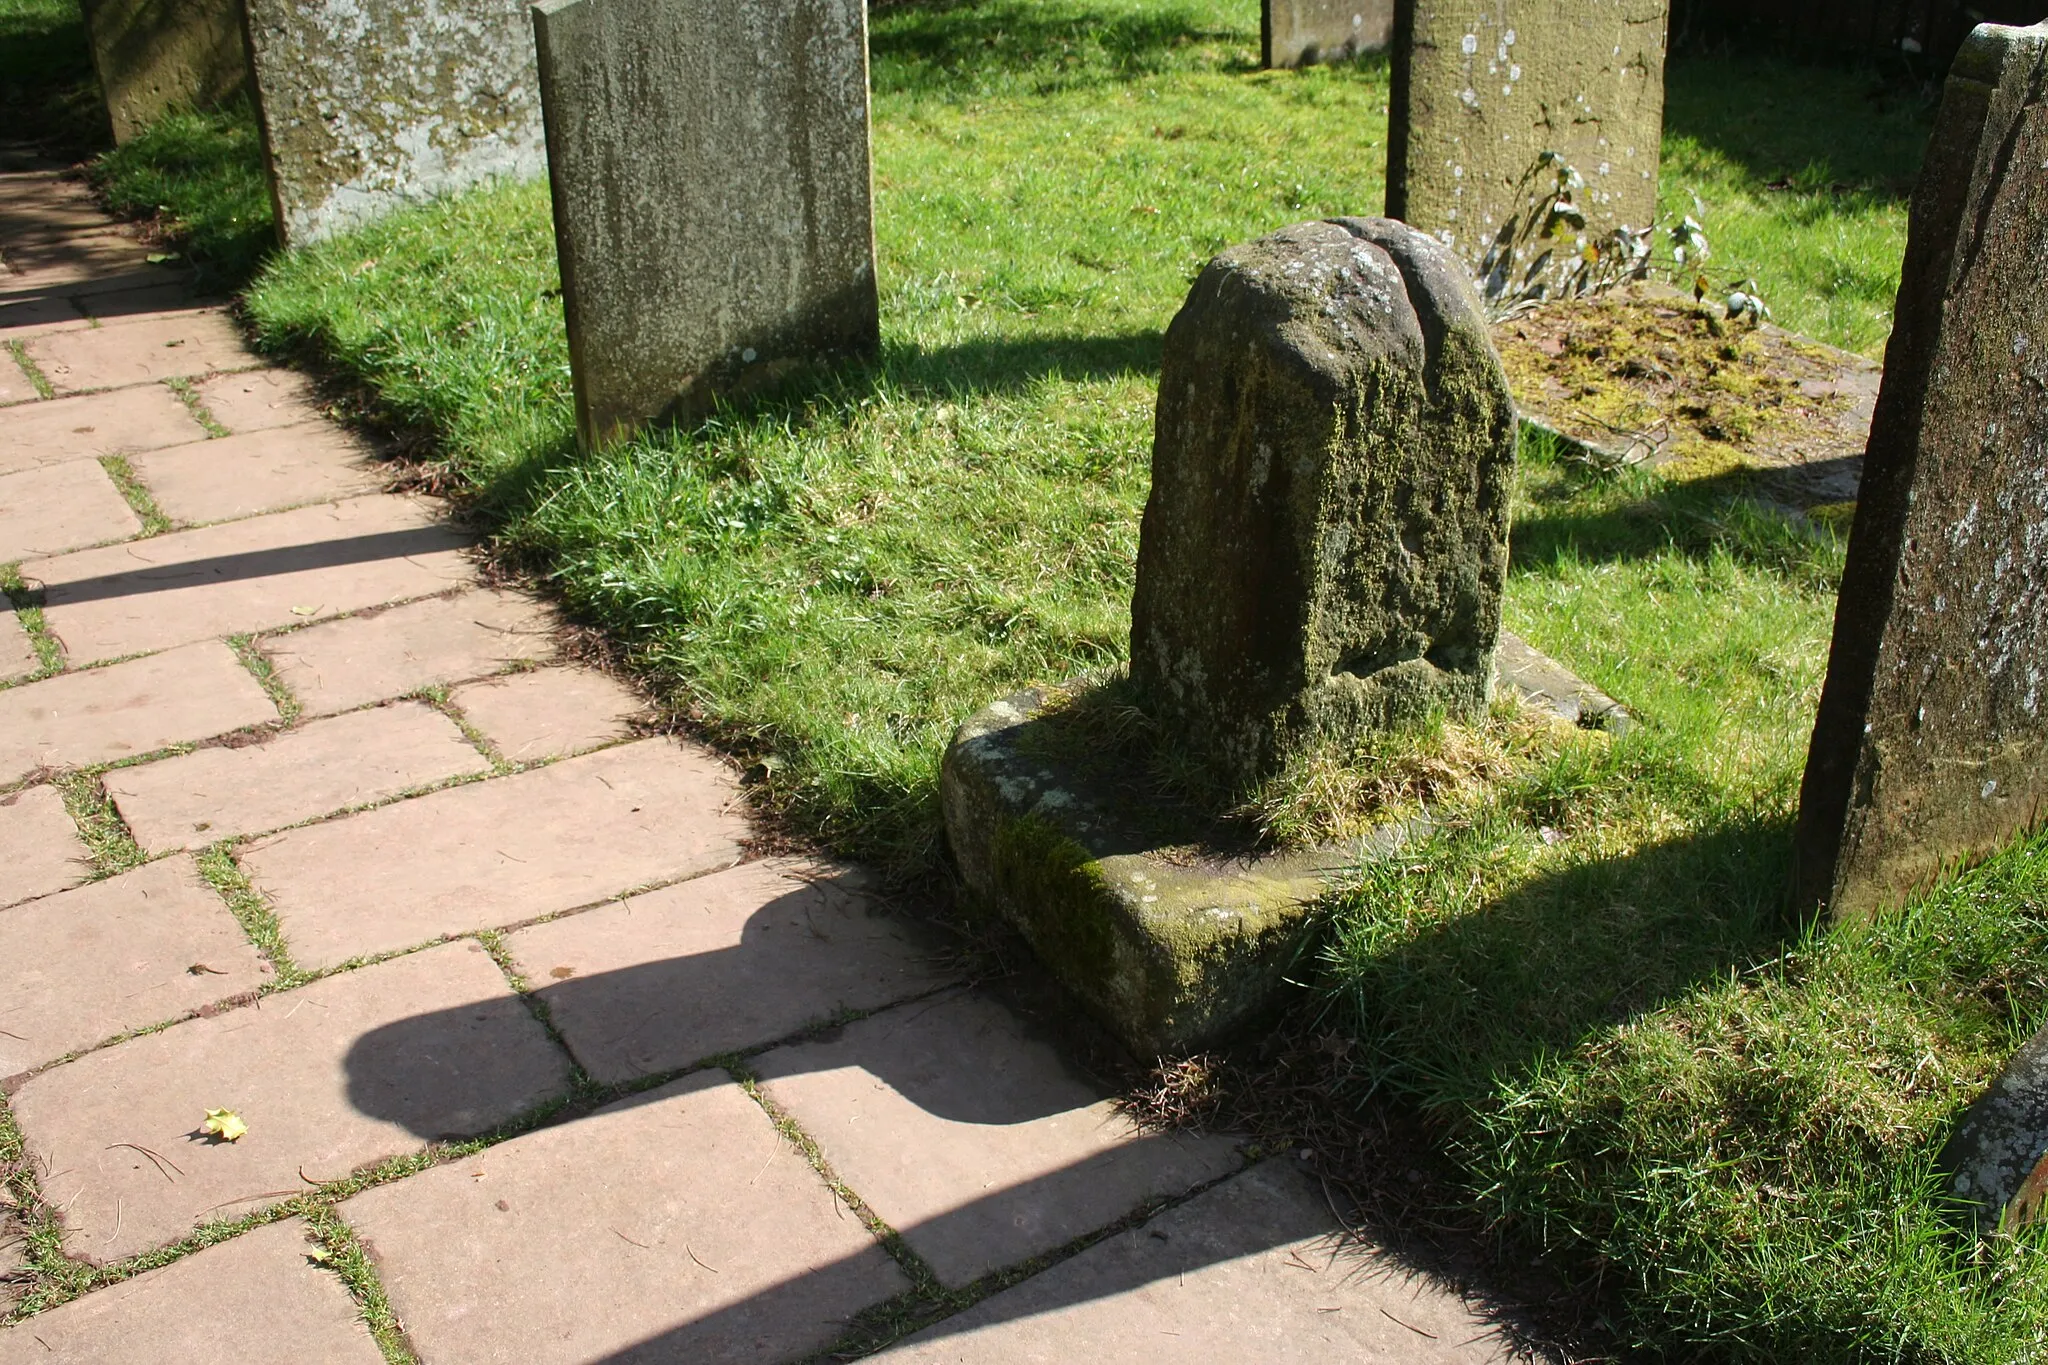 Photo showing: Cross, approximately 7 metres south of nave of Church Of St Lawrence Wikidata has entry Cross, Approximately 7 Metres South Of Nave Of Church Of St Lawrence (Q26289492) with data related to this item.